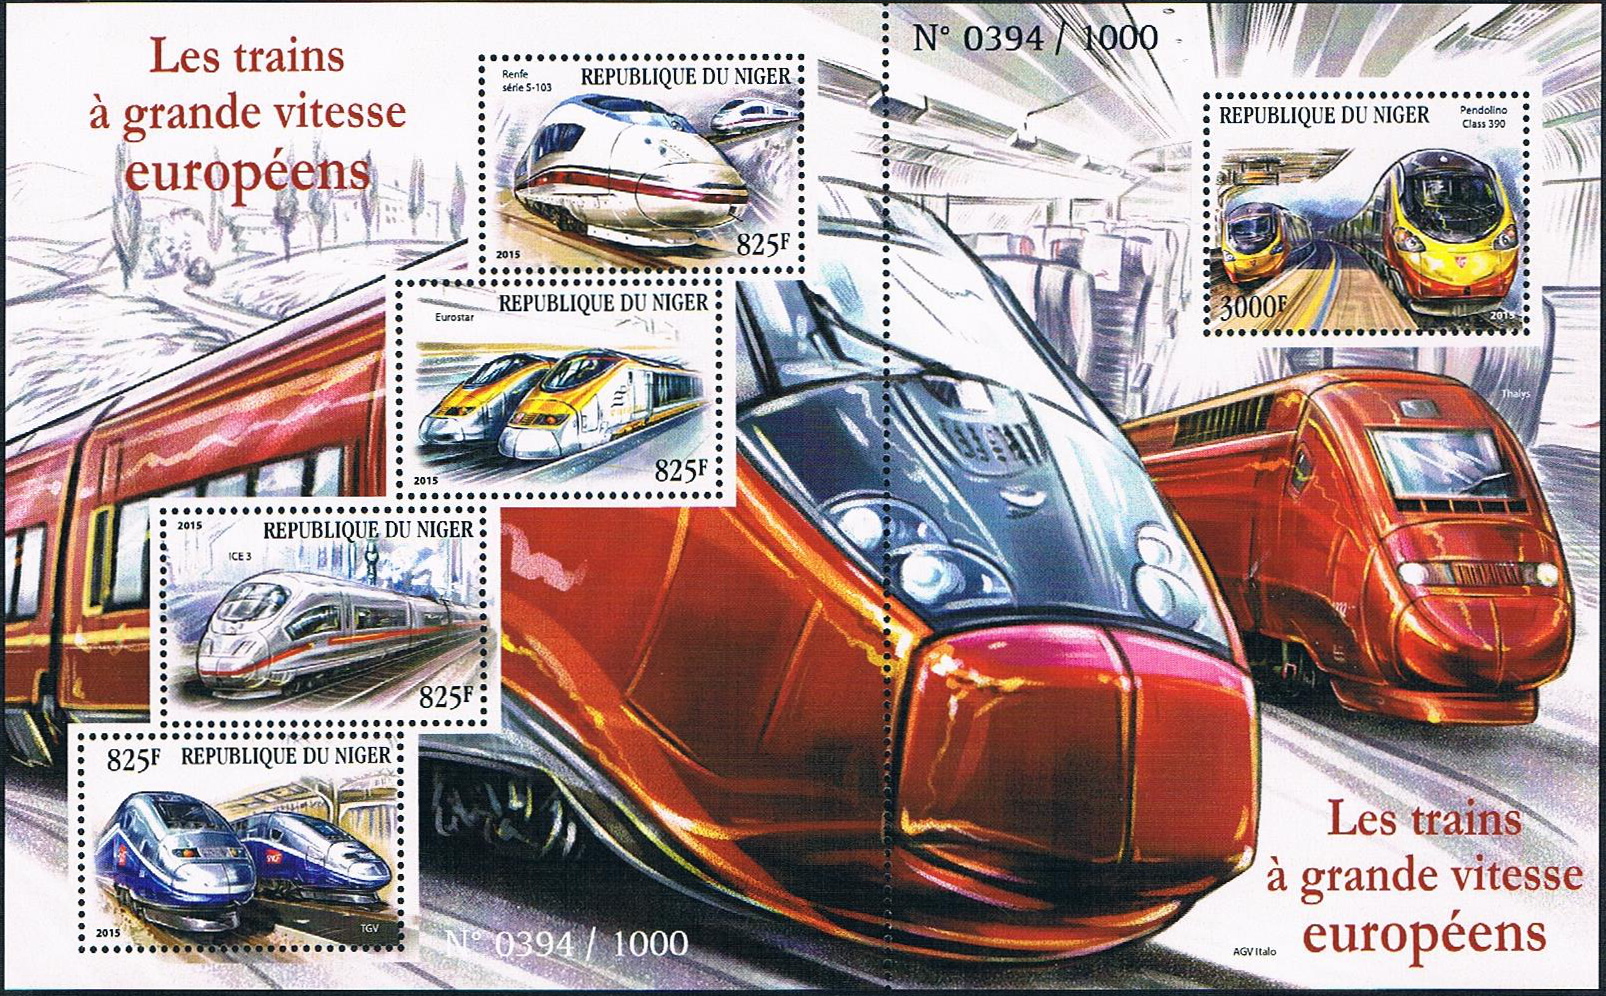 year=2015, Niger Stamp with Thalys